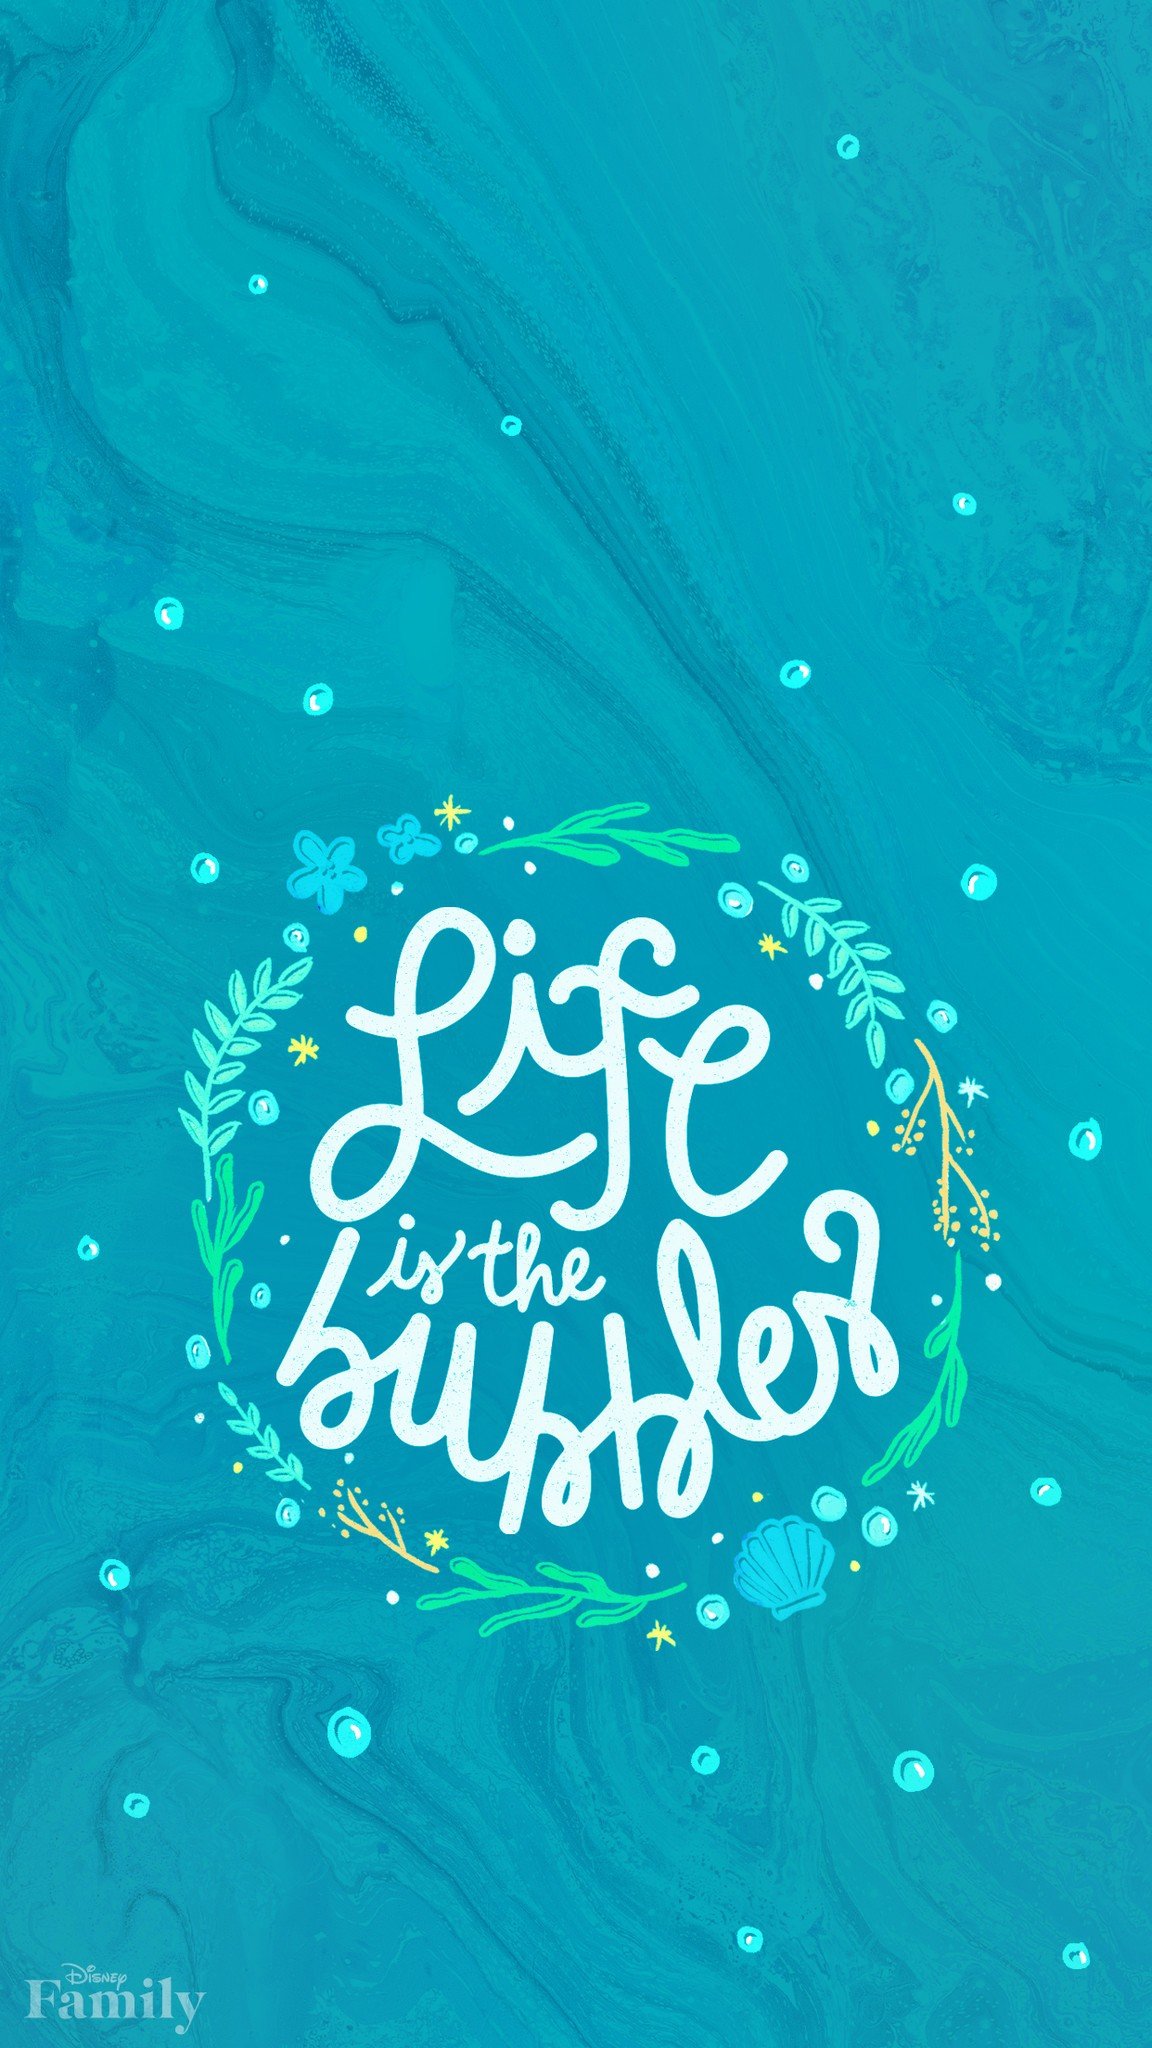 Life is the bubbles!